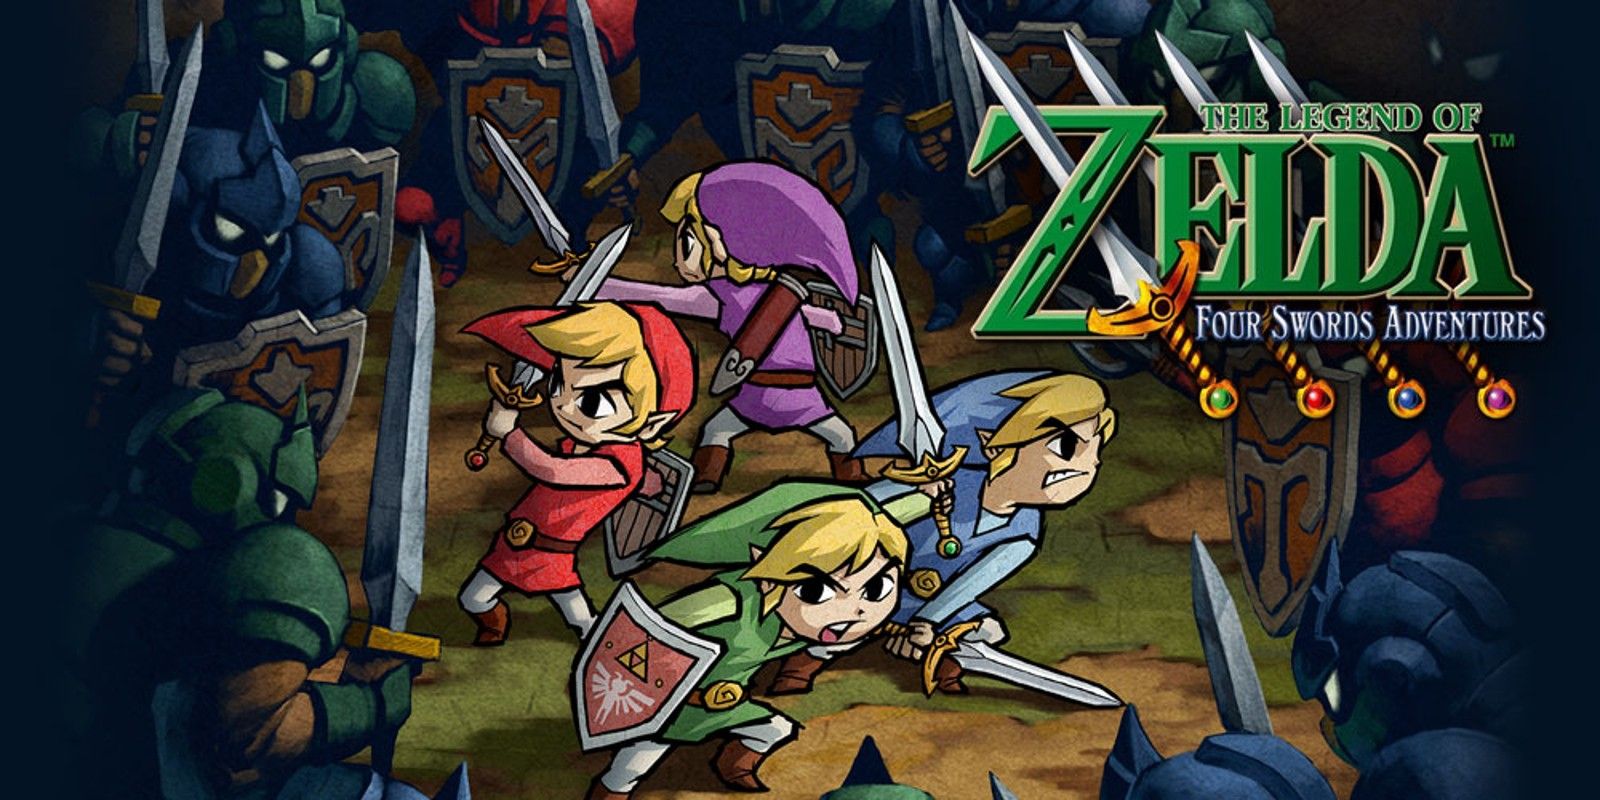 Key art including the logo for Four Swords Adventures, showing the four Links surrounded by enemies.